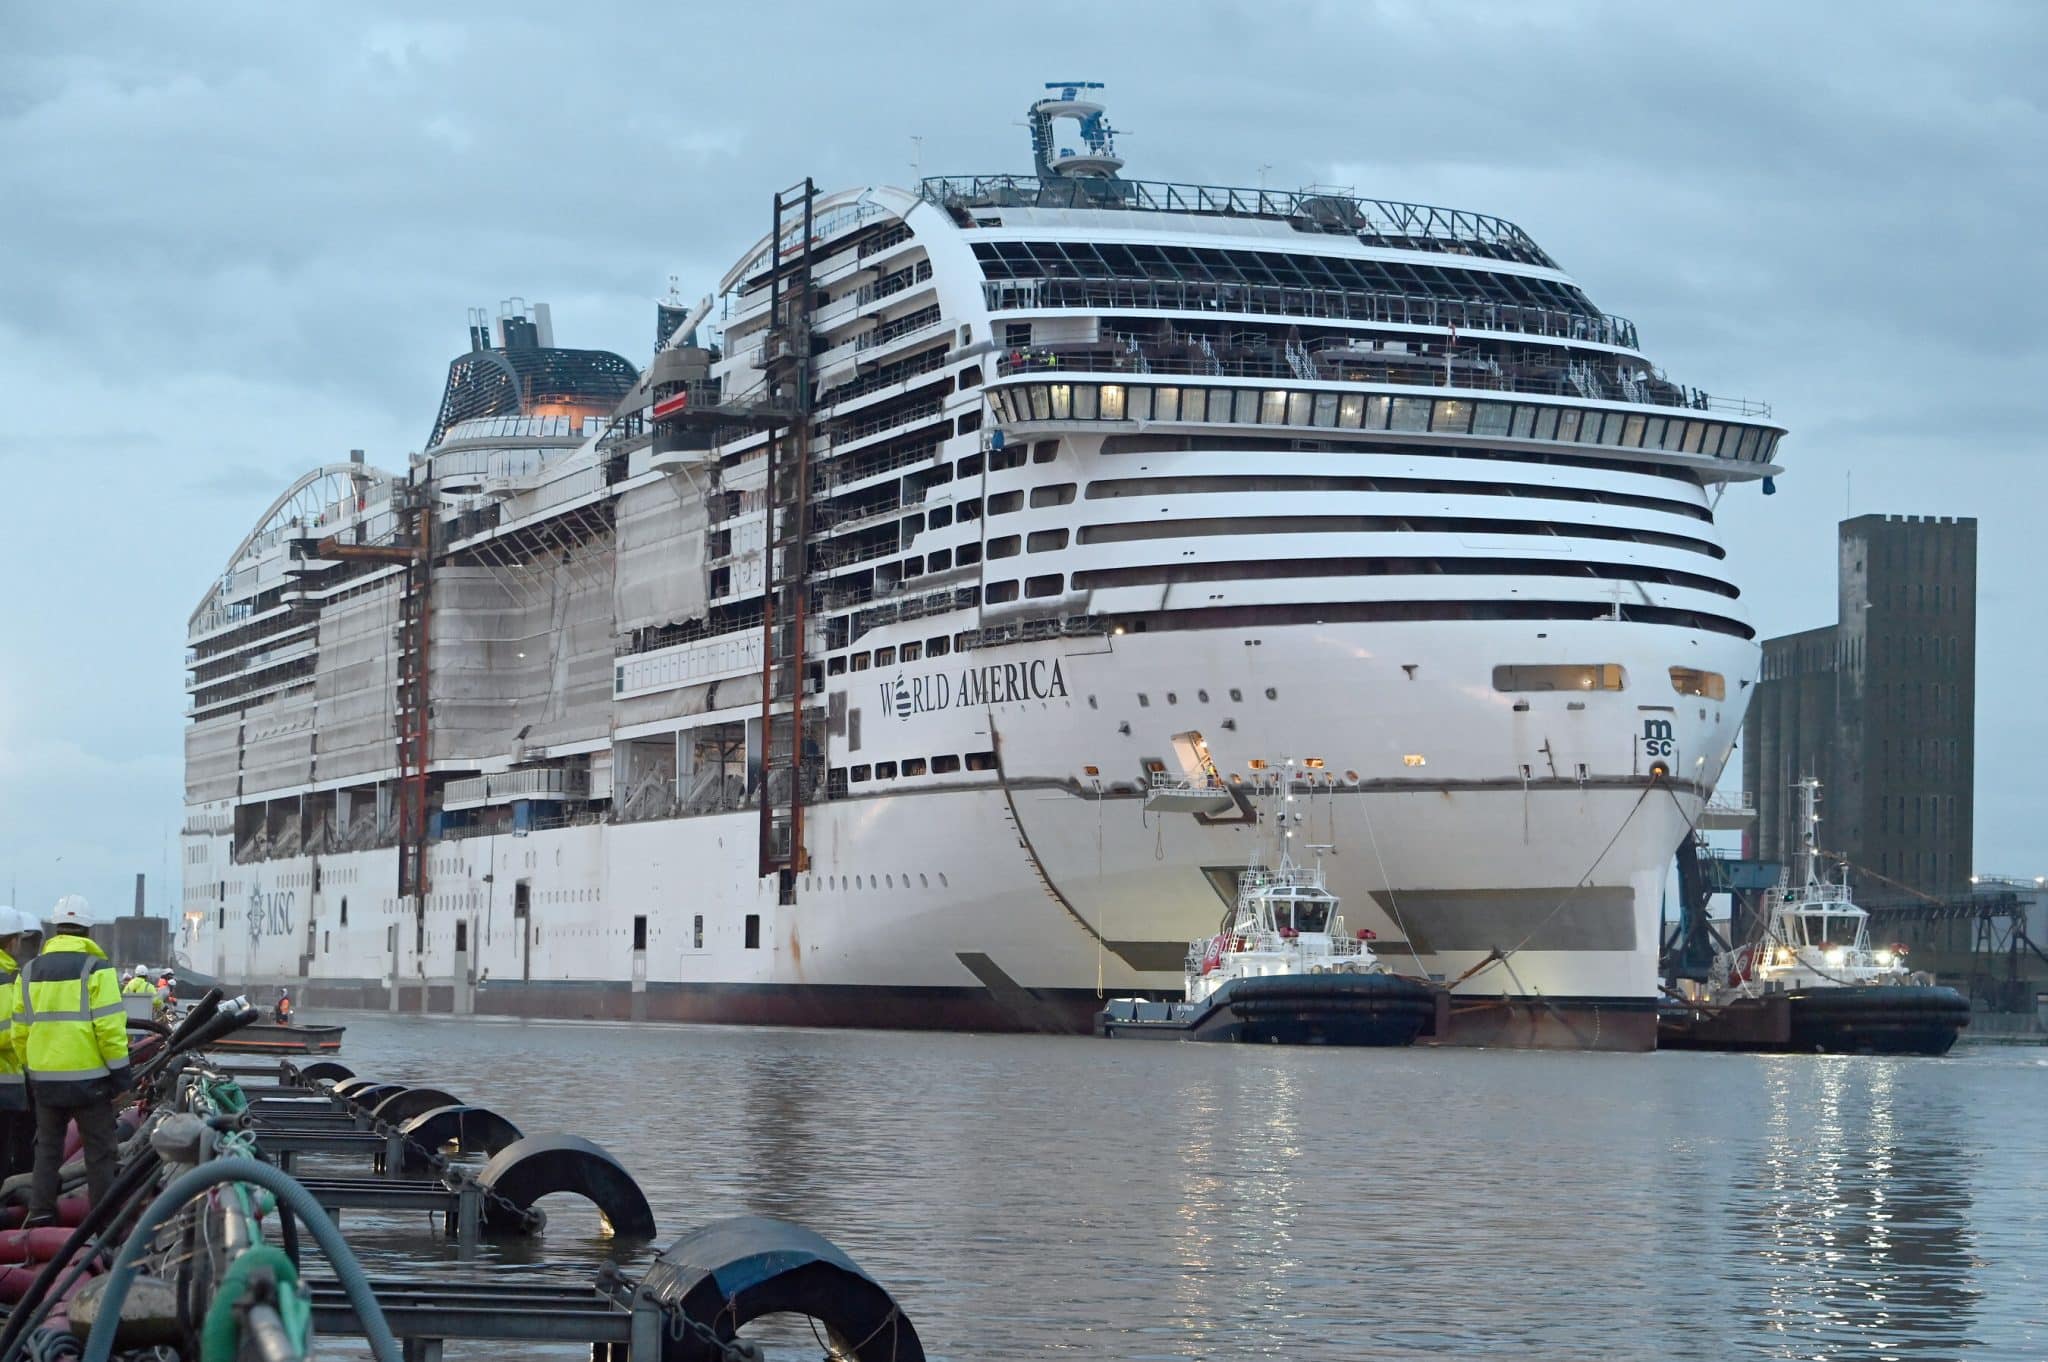 MSC World America is floated out at the shipyard